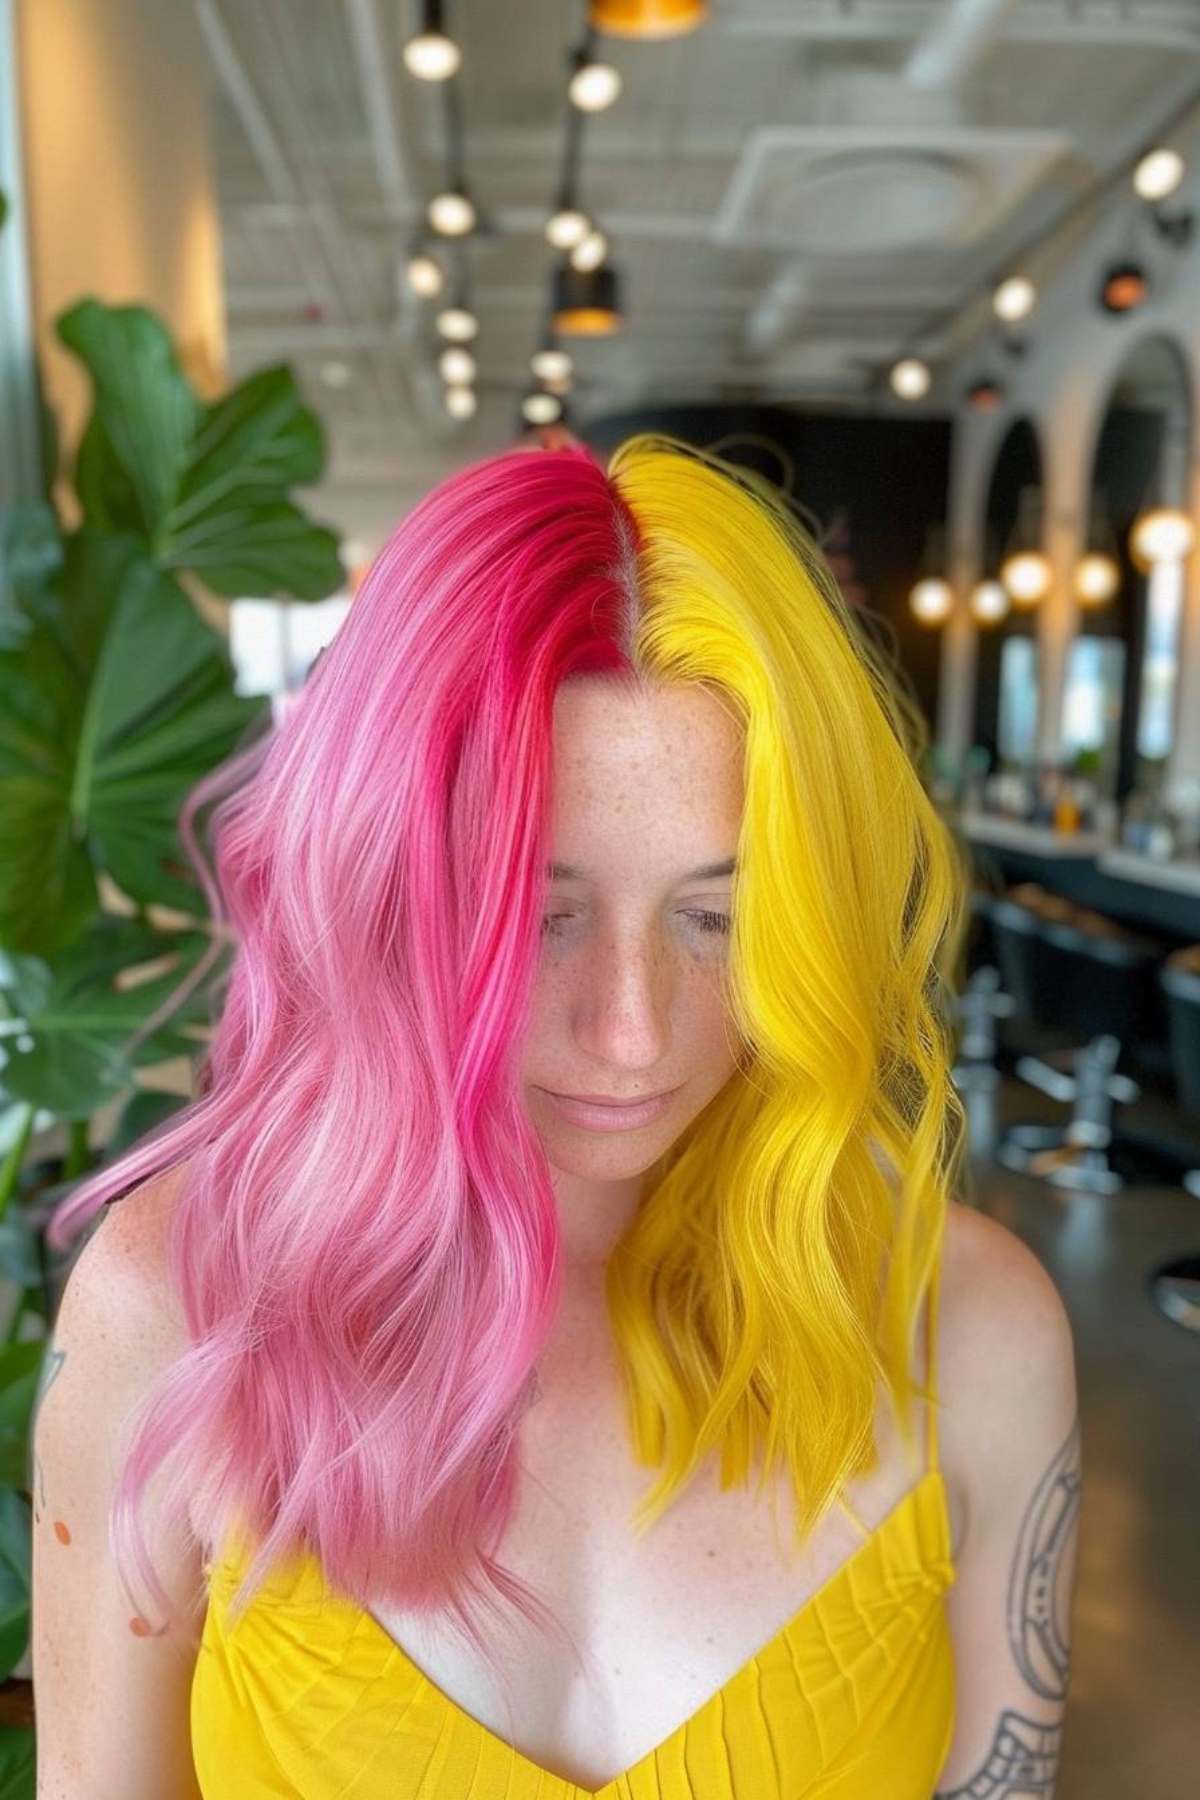 Medium-length wavy hair with a vibrant Gemini-inspired pink and yellow split-dye.